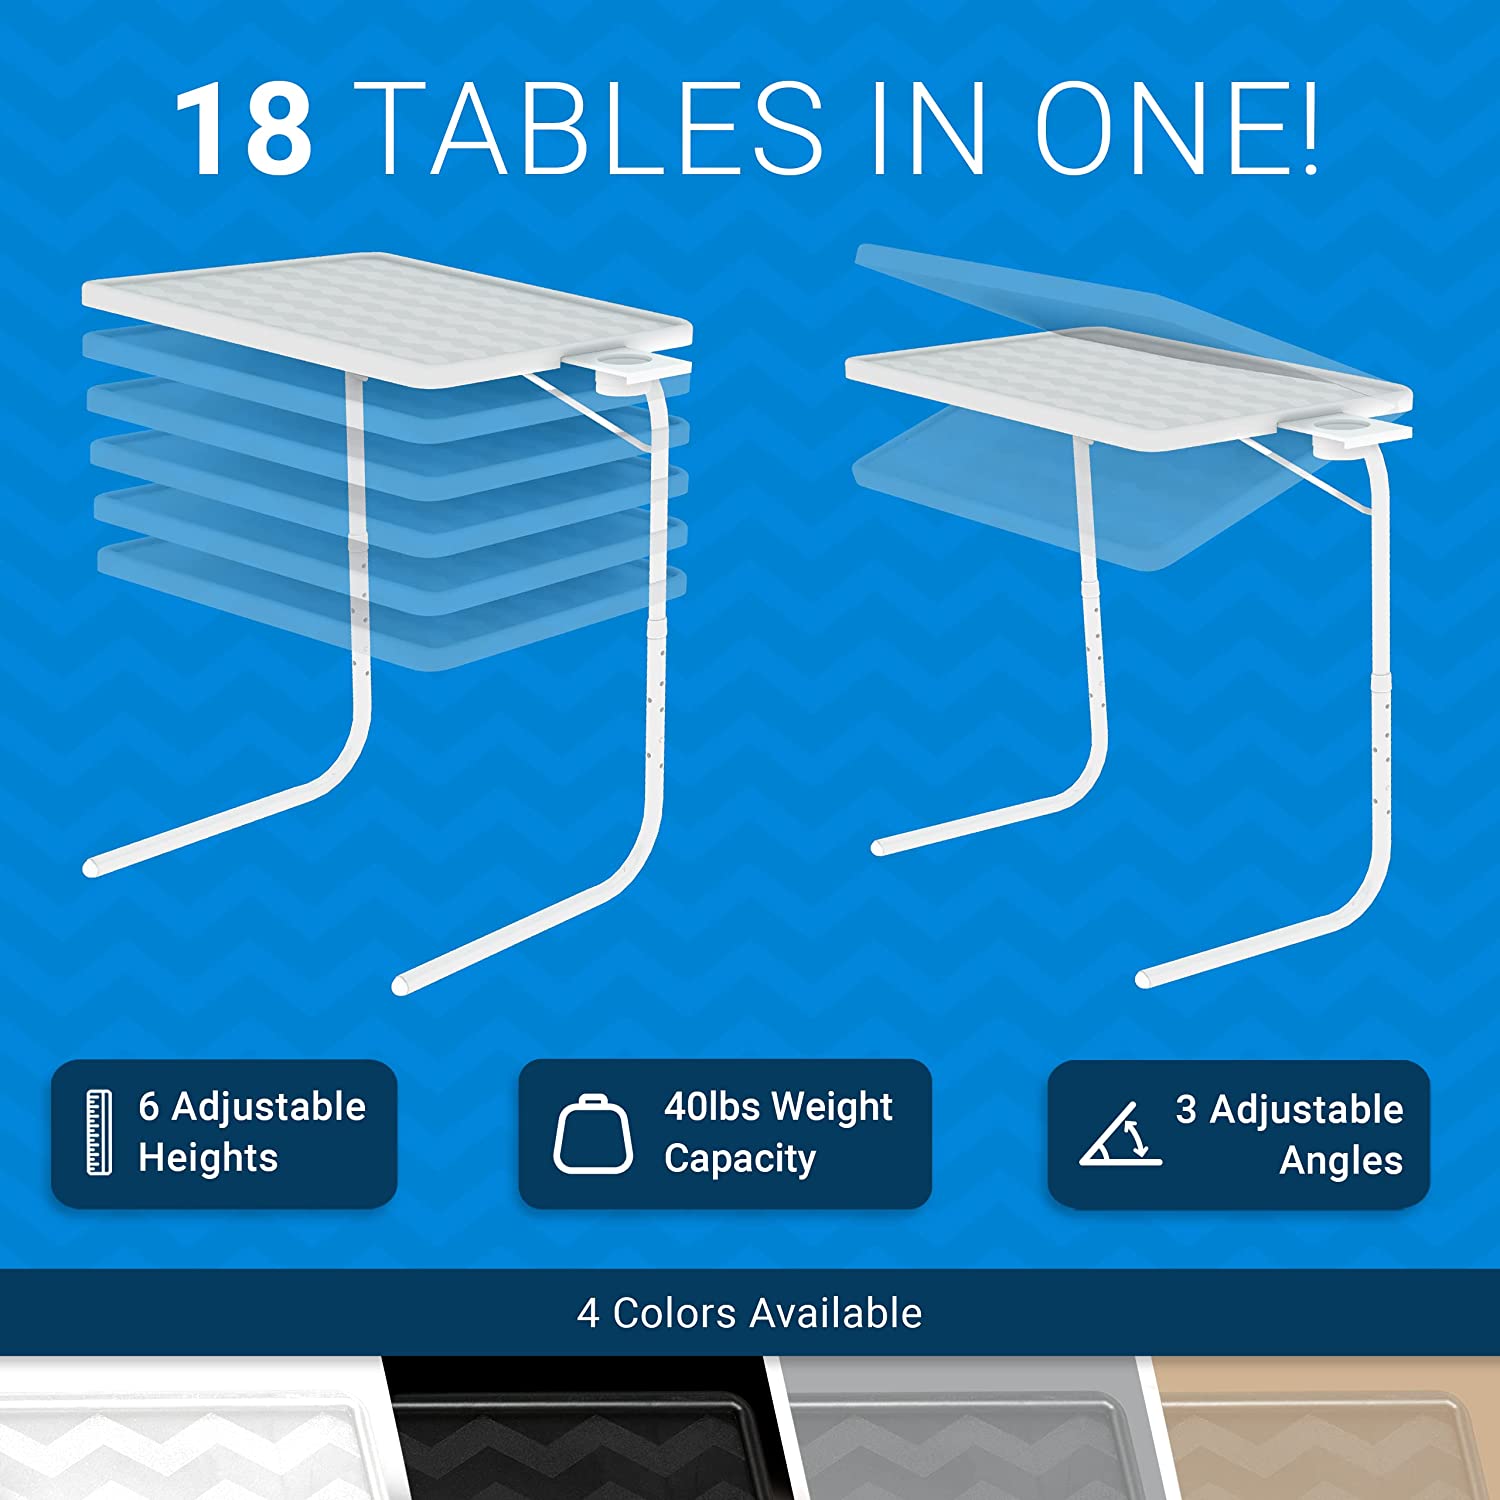 Check out this duo tray table cover & game table 2-in-1 ‼️ Great for f, Airplane